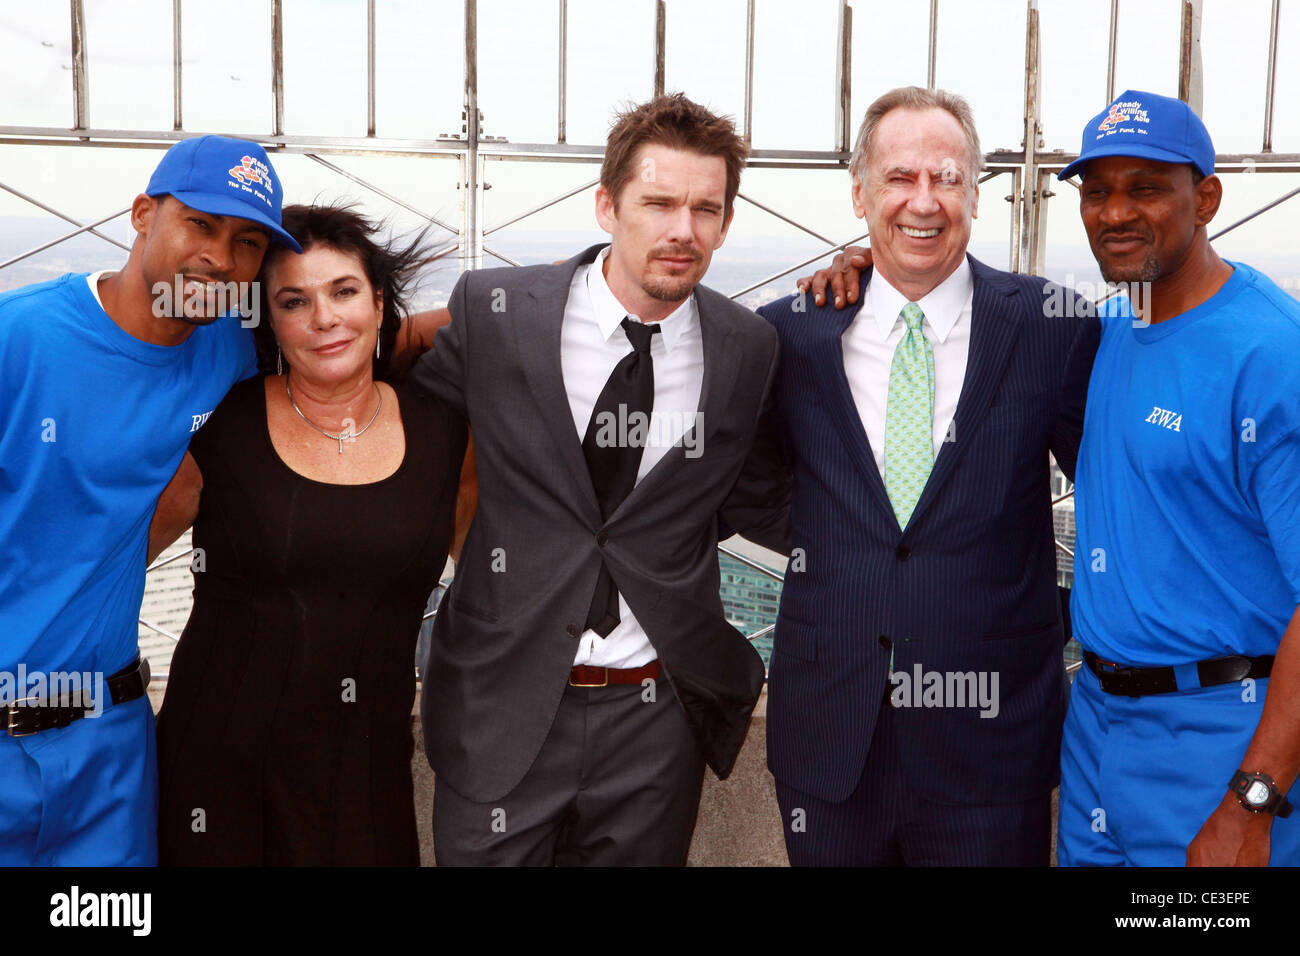 Abner Palmer, Harriet McDonald, Ethan Hawke, George McDonald, David Booker  Ethan Hawke lights the Empire State Building blue to celebrate the 'Men in Blue' of the Doe Fund's Ready, Willing and Able Program New York City, USA - 28.10.10 Stock Photo